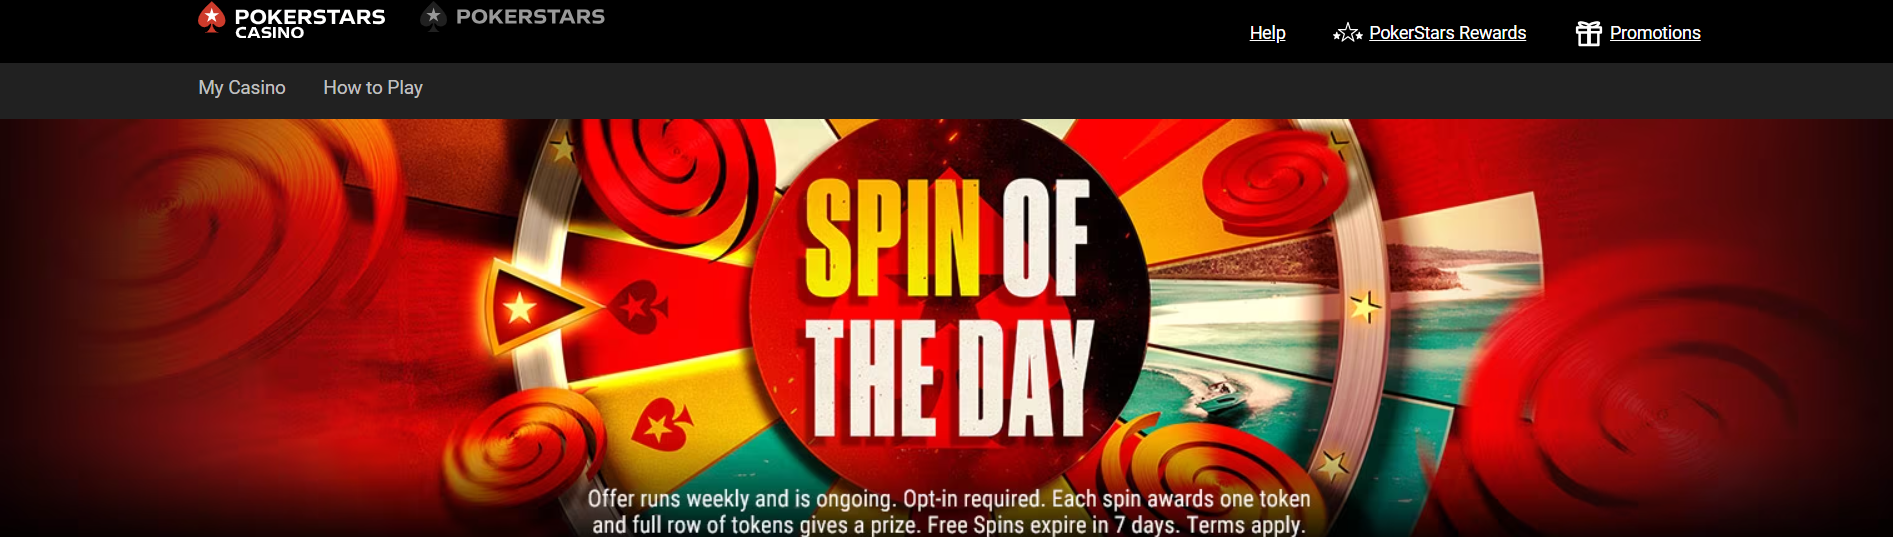 Free Spin of the Day at PokerStars Casino PA